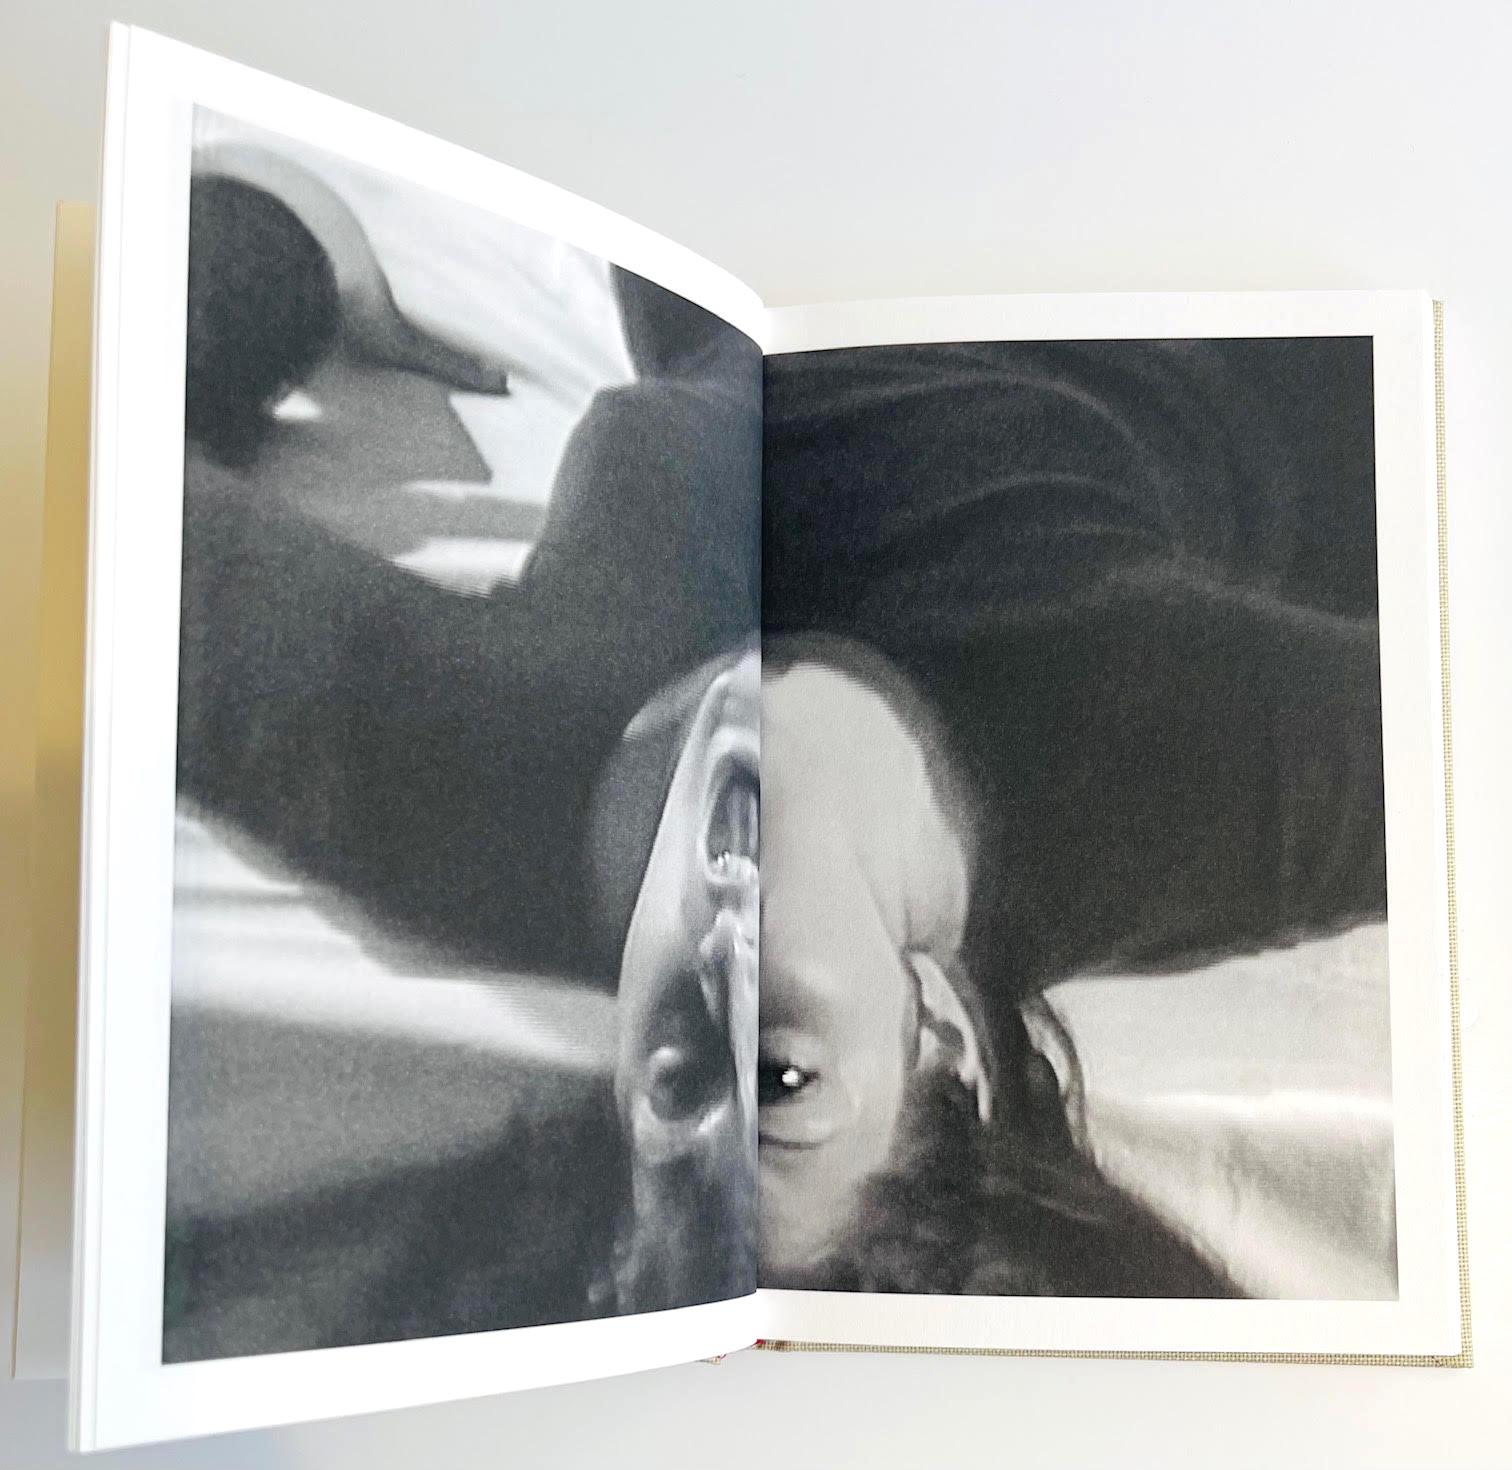 512 Hours (Monograph hand signed and inscribed by Marina Abramovic) 13